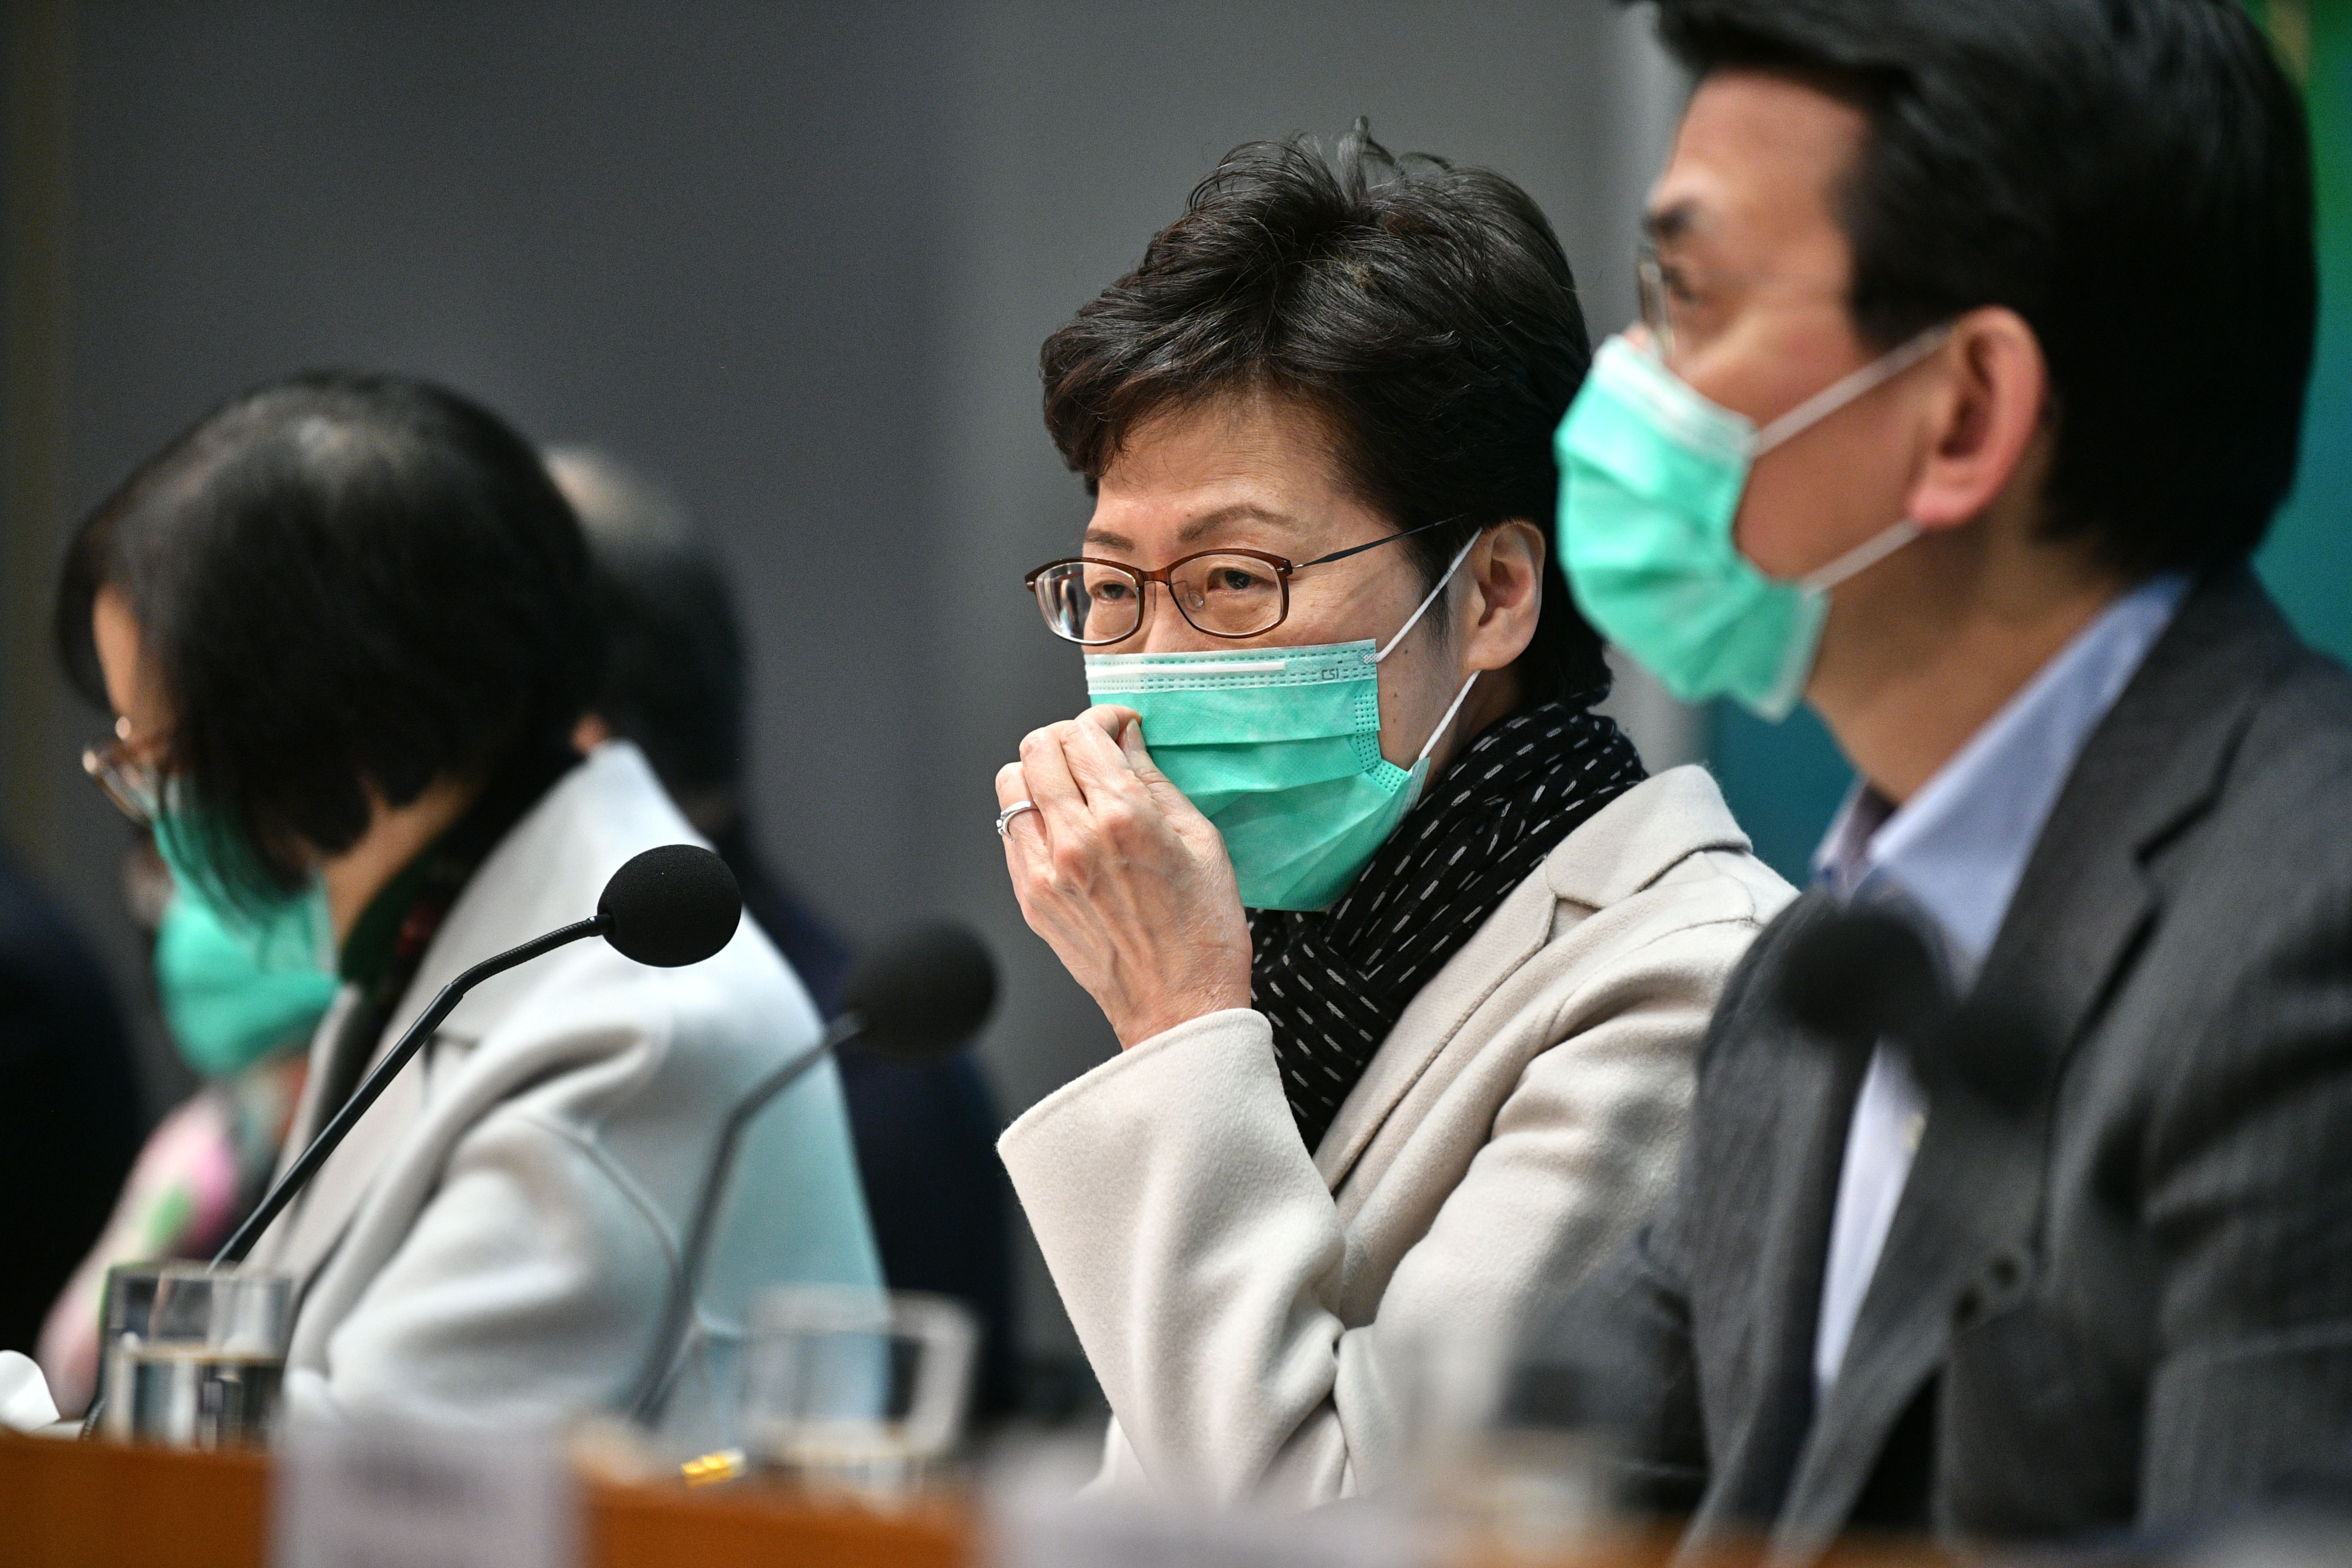 Hong Kong's Chief Executive Carrie Lam said the city will reduce cross-border travel between the mainland in an effort to control the spread of the Wuhan coronavirus.